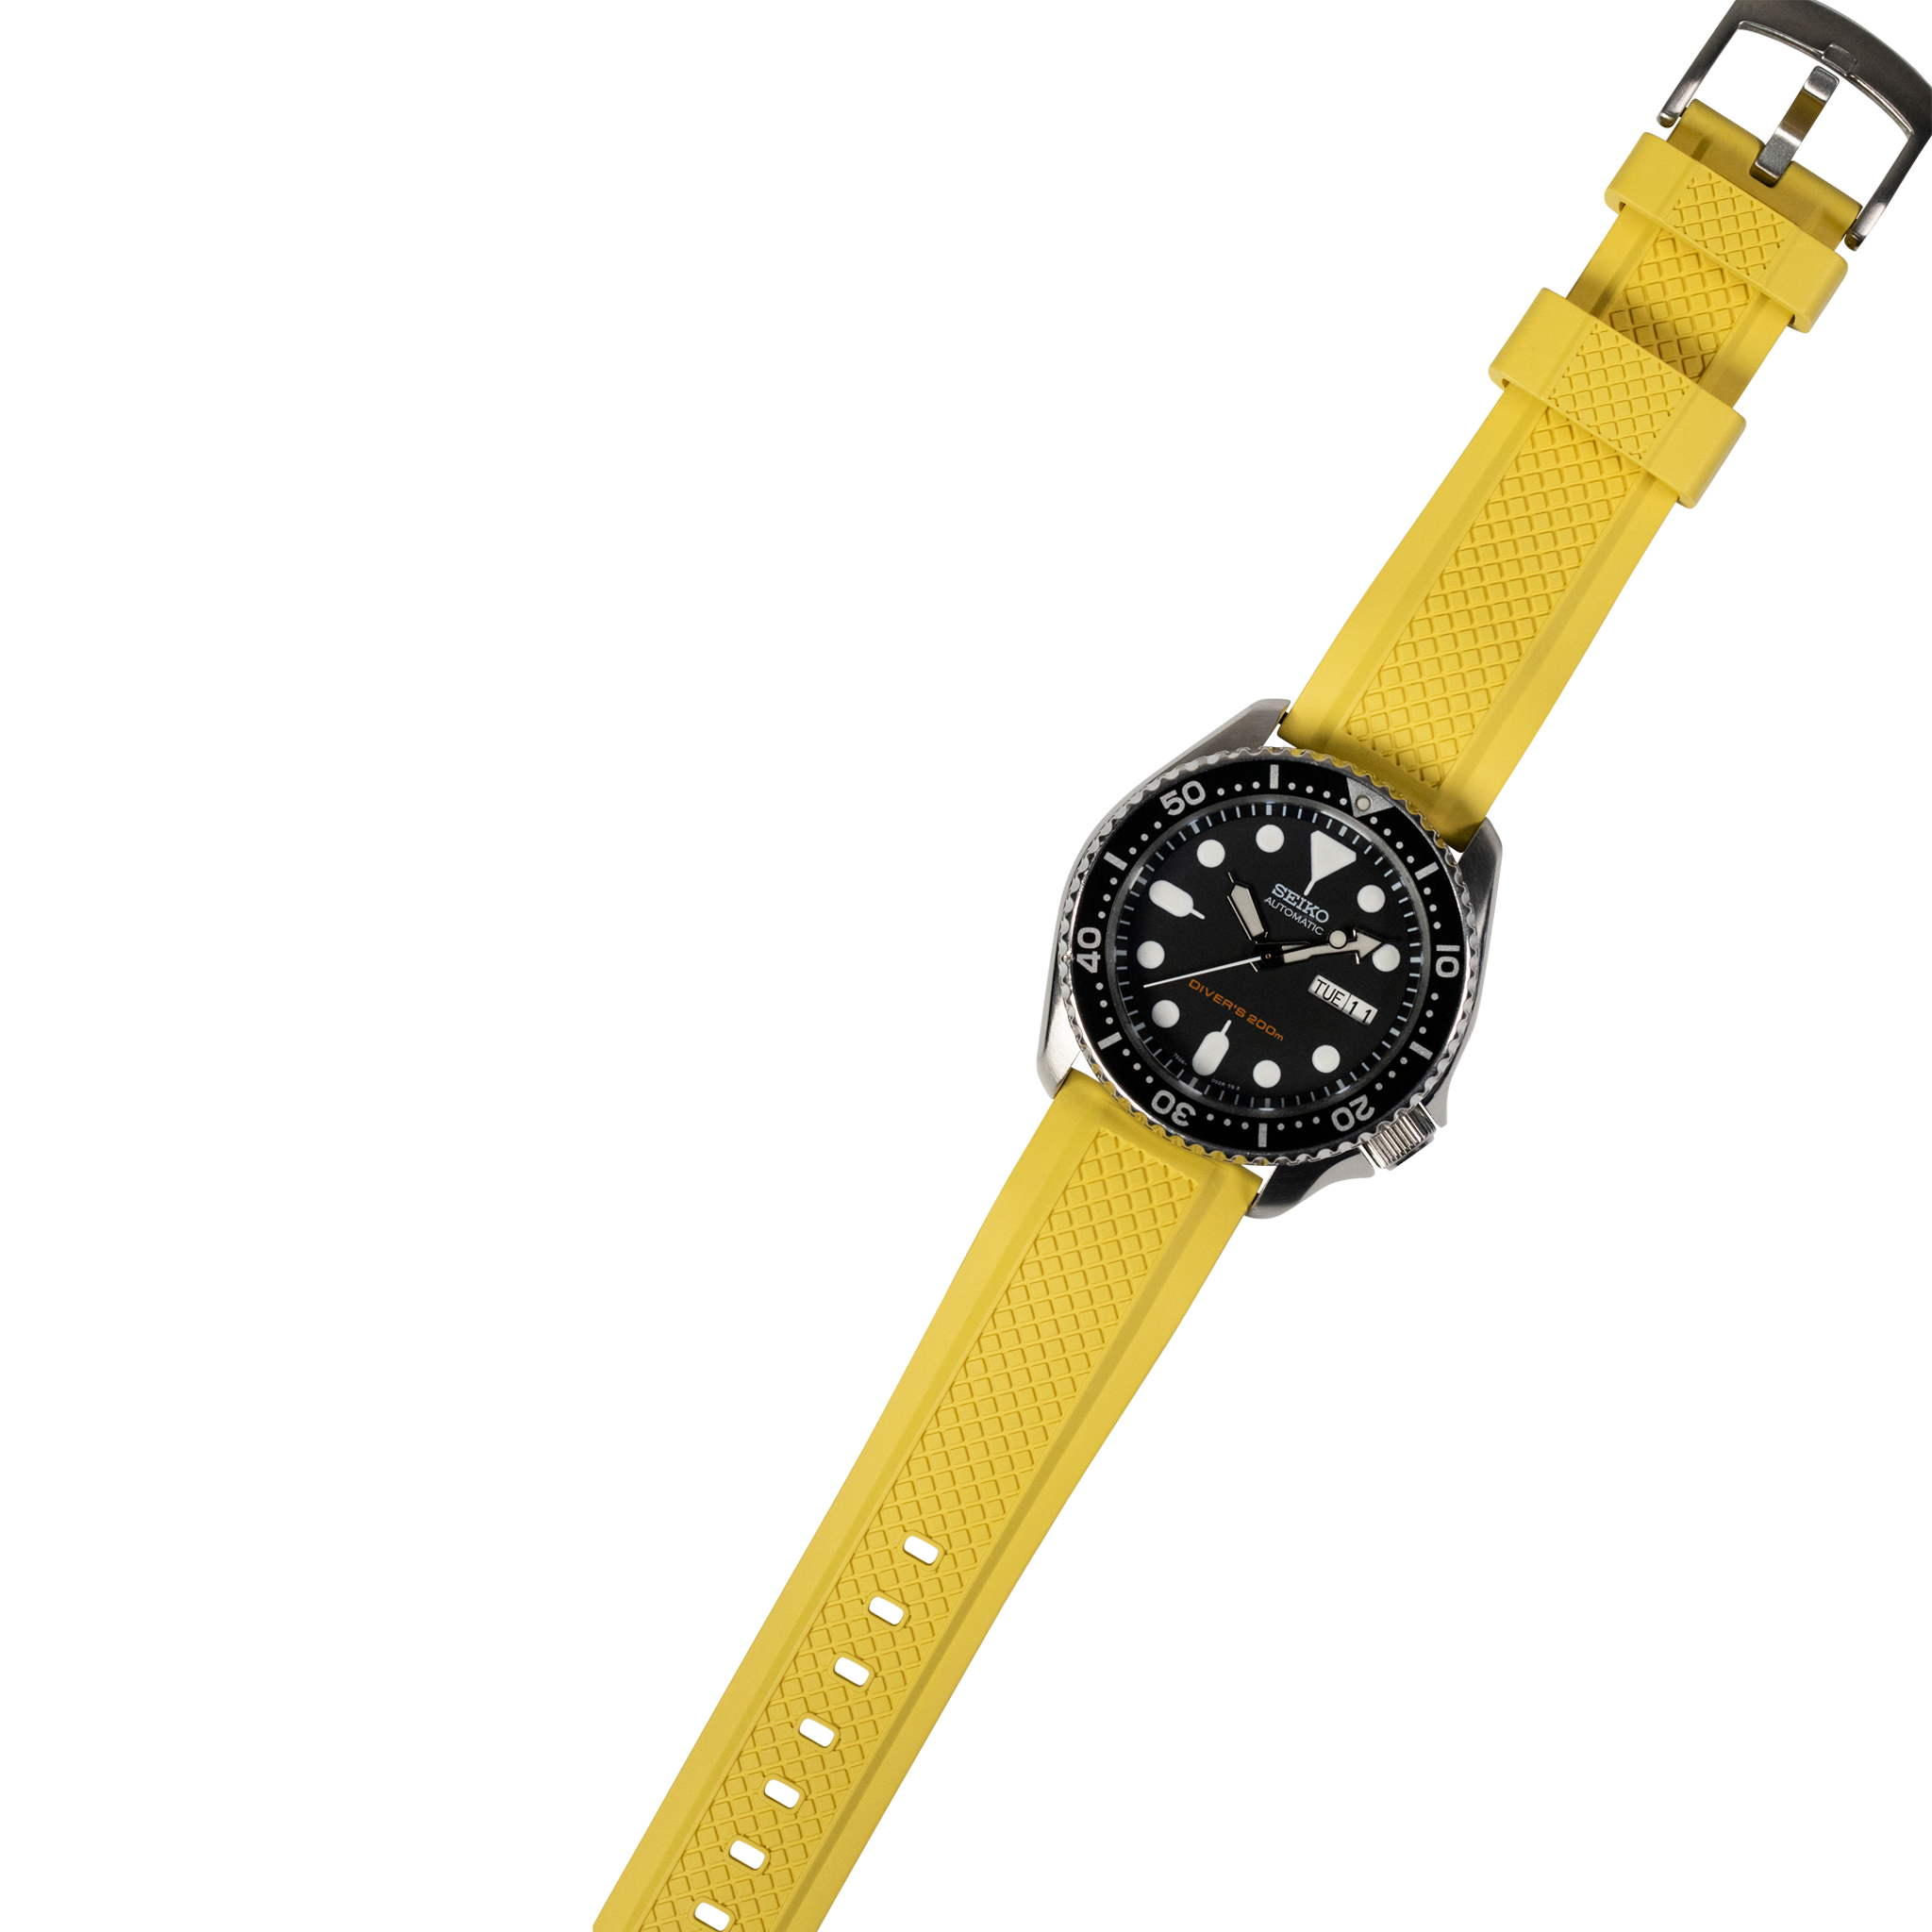 [Quick Release] GridLock FKM Rubber - Yellow